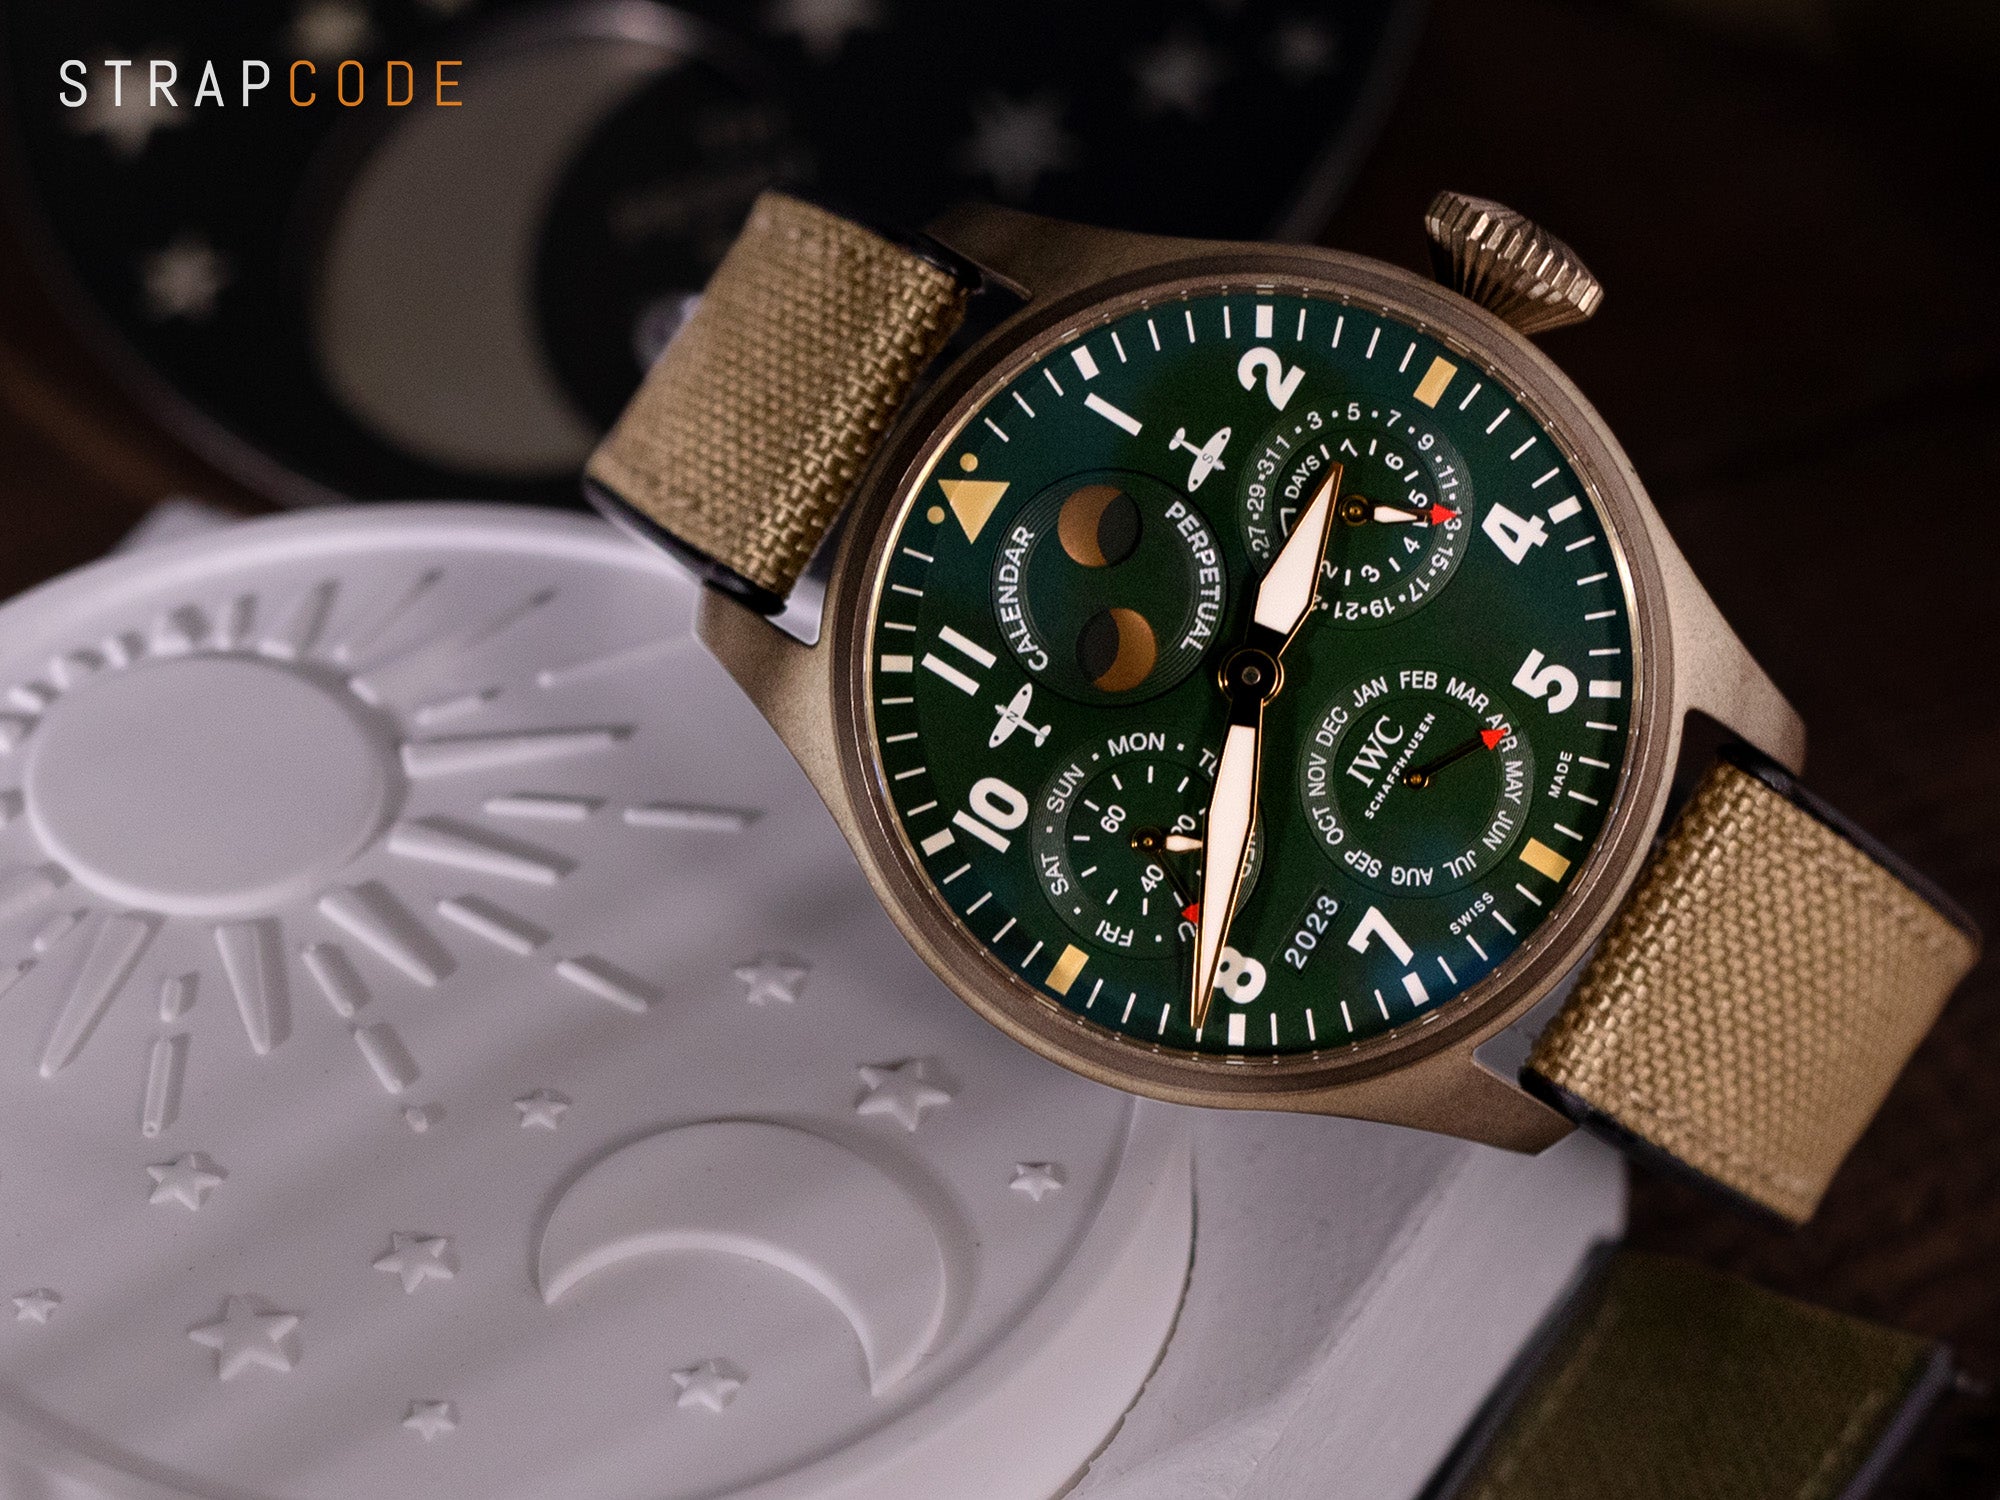 IWC Big Pilot's Watch Perpetual Calendar Spitfire and Hybrid Sailcloth Strap by Strapcode watch bands